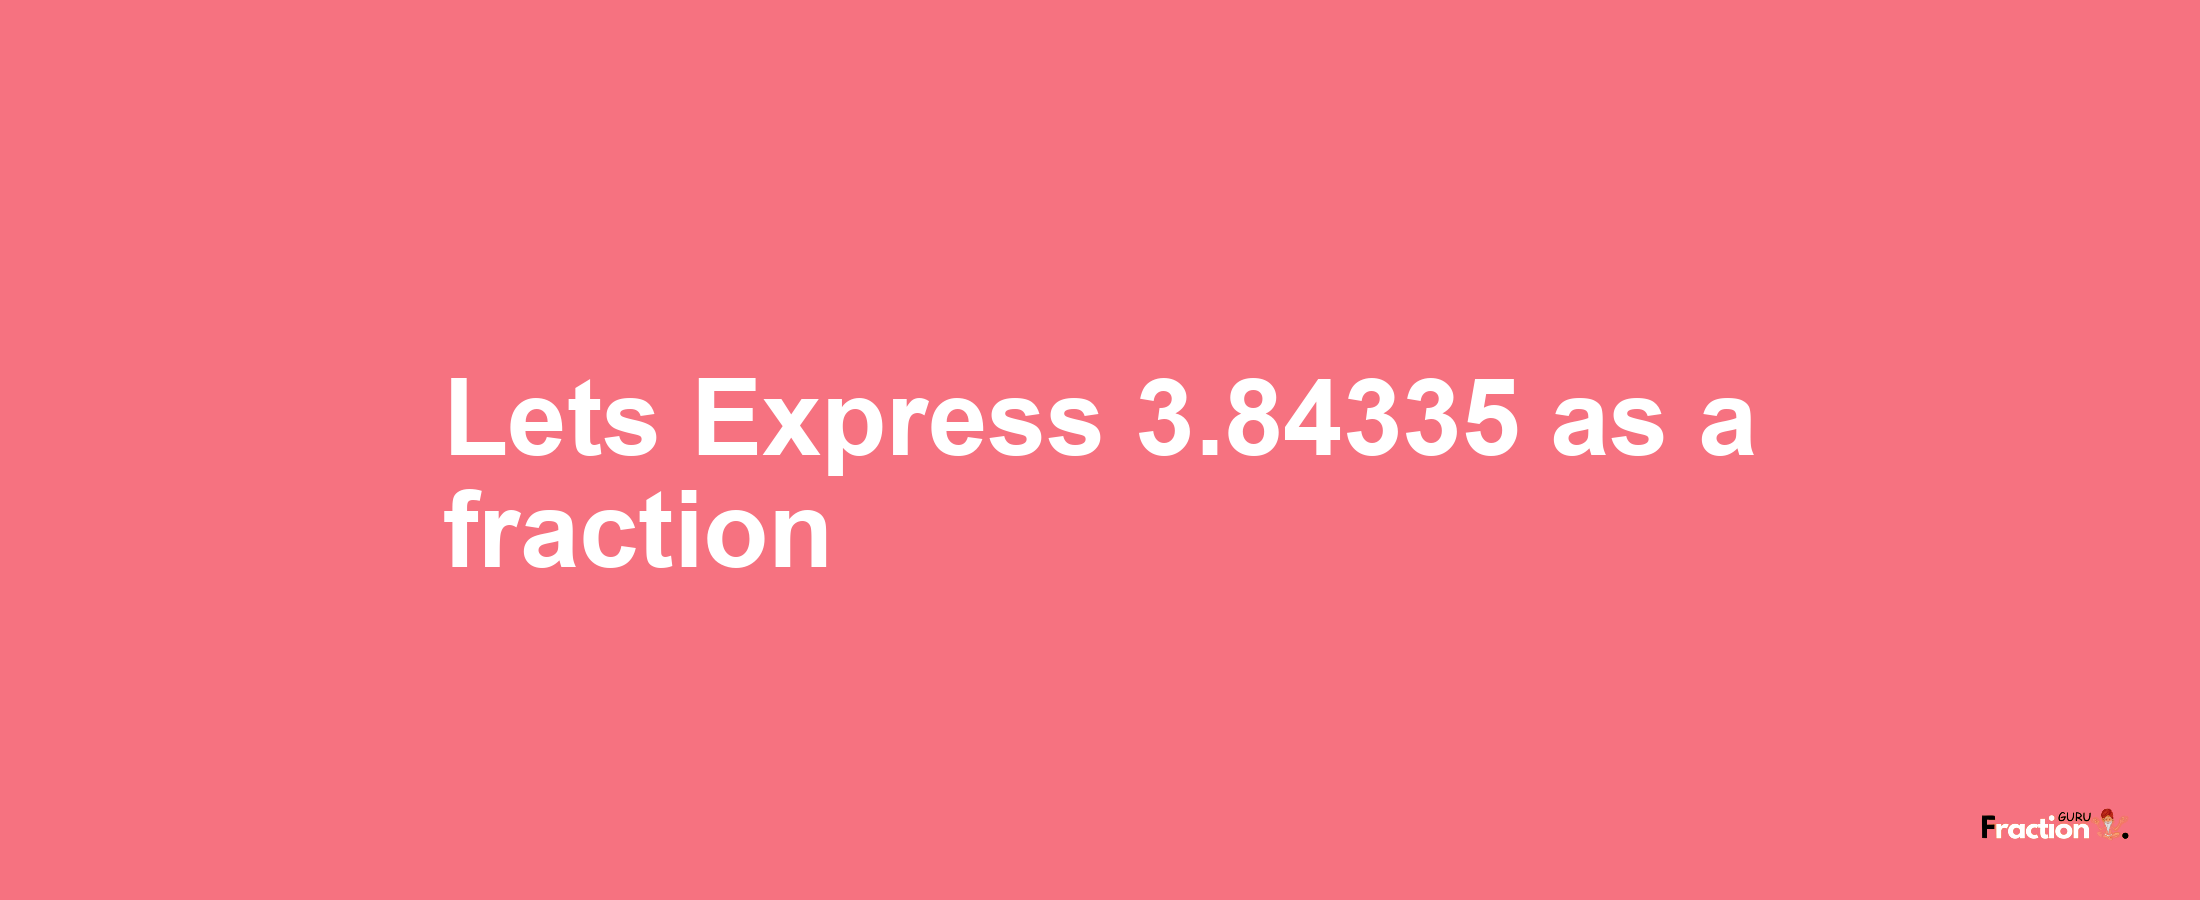 Lets Express 3.84335 as afraction